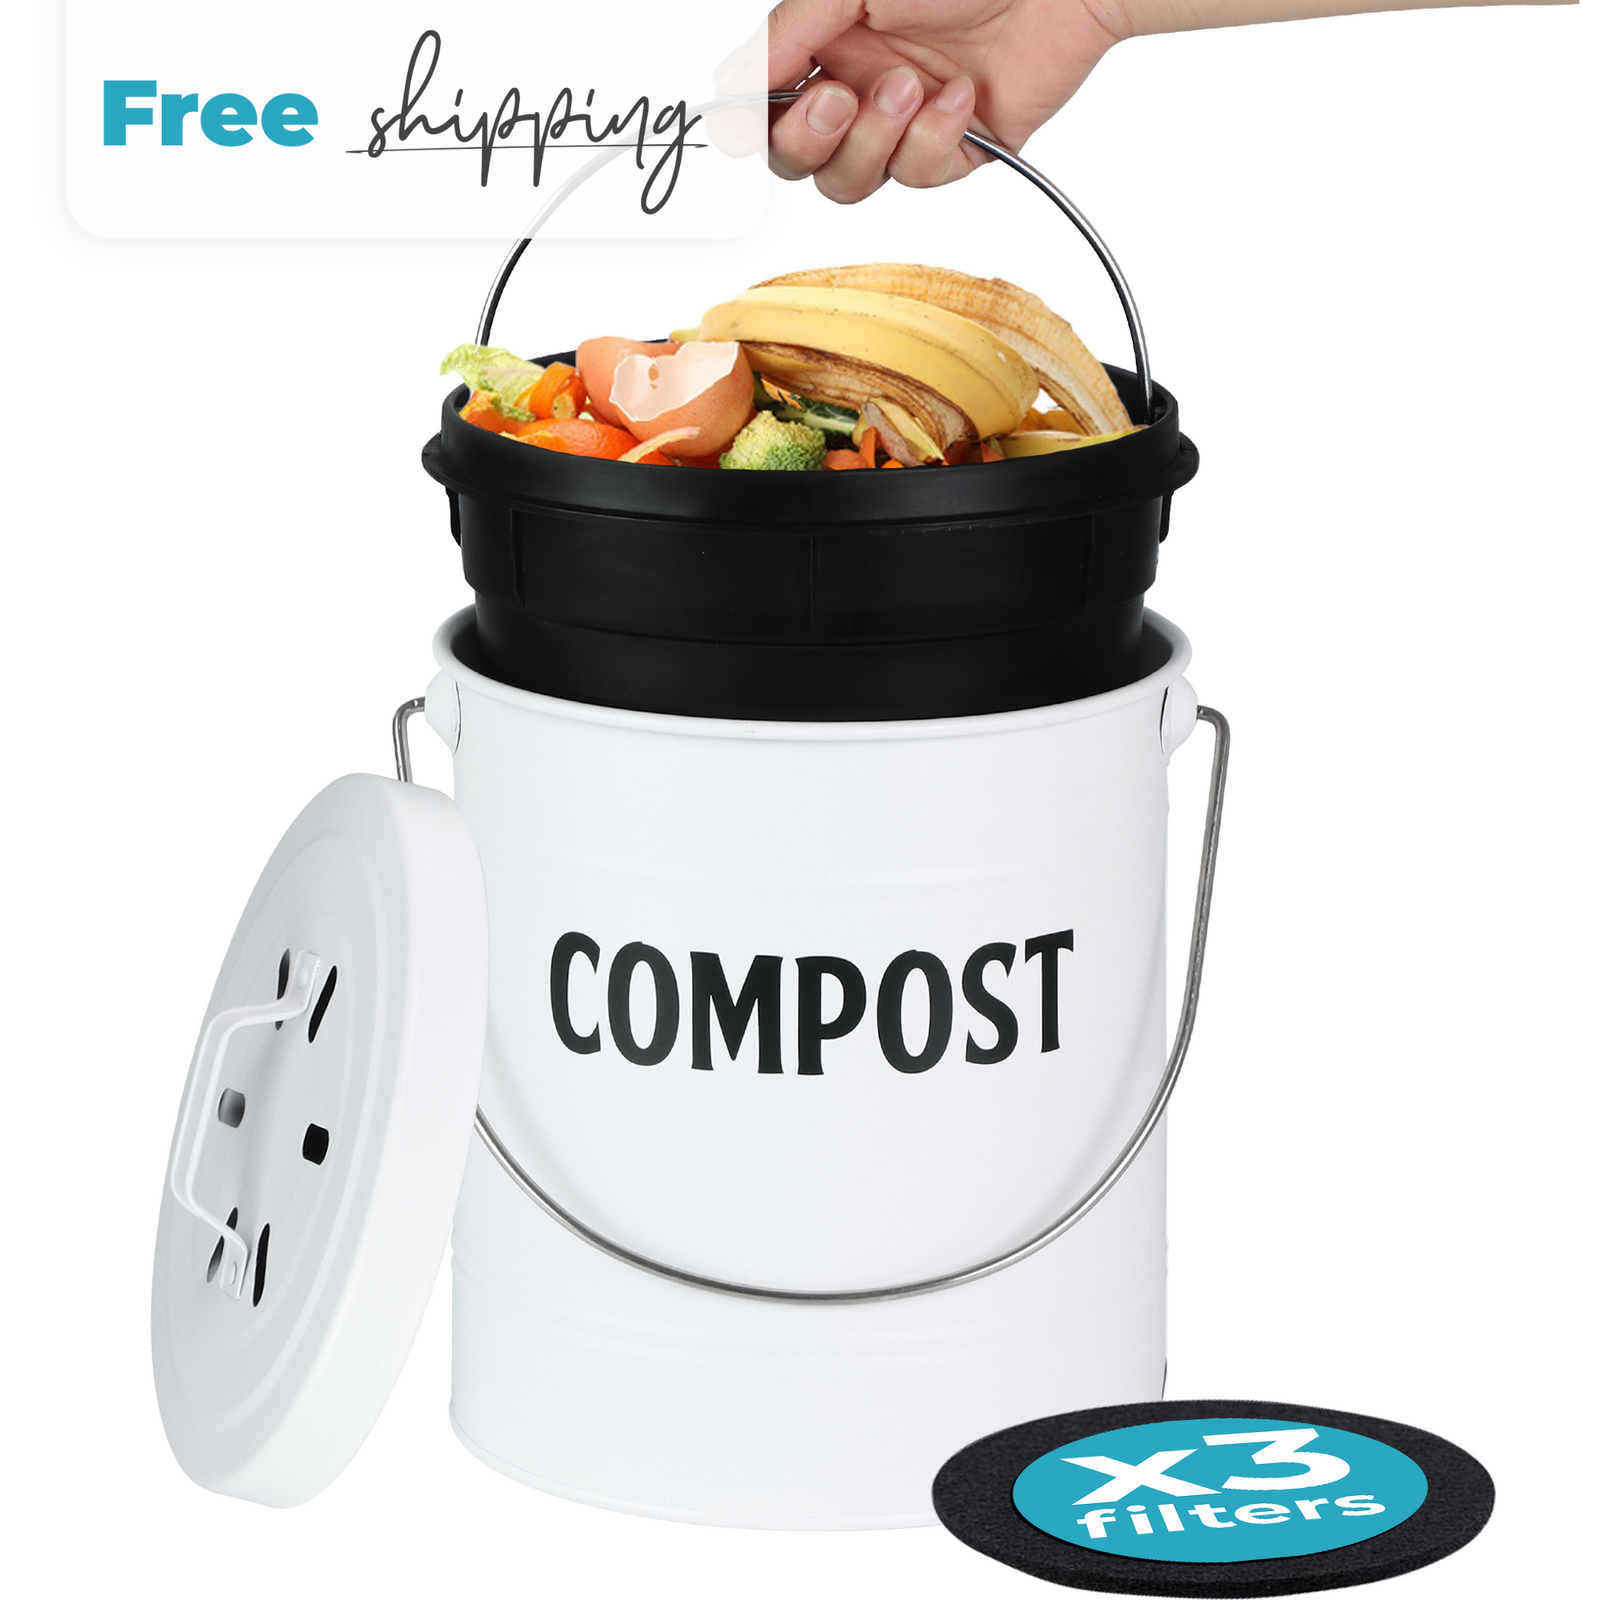 Compost Bin Kitchen Counter - 1.3 Gallon Black Stainless Steel Kitchen  Compost Bin with Wood Handles & Charcoal Filters x3 Sets - Countertop  Compost